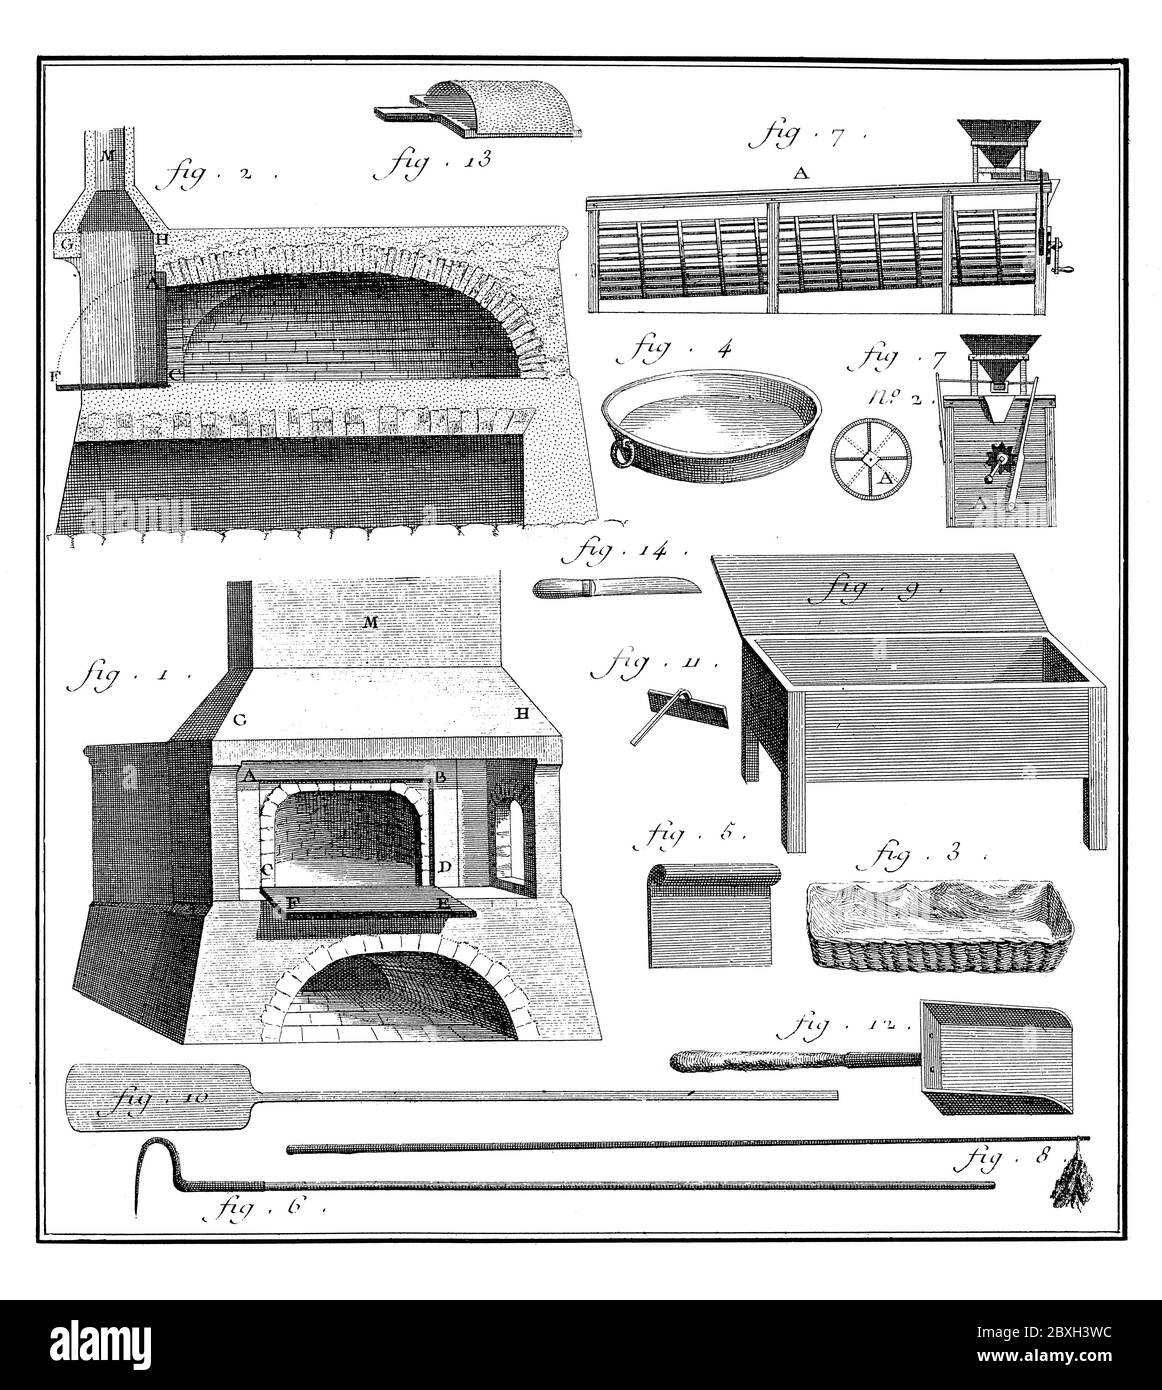 18th century illustration of vintage baking tools and equipment. Published in 'A Diderot Pictorial Encyclopedia of Trades and Industry” Stock Photo